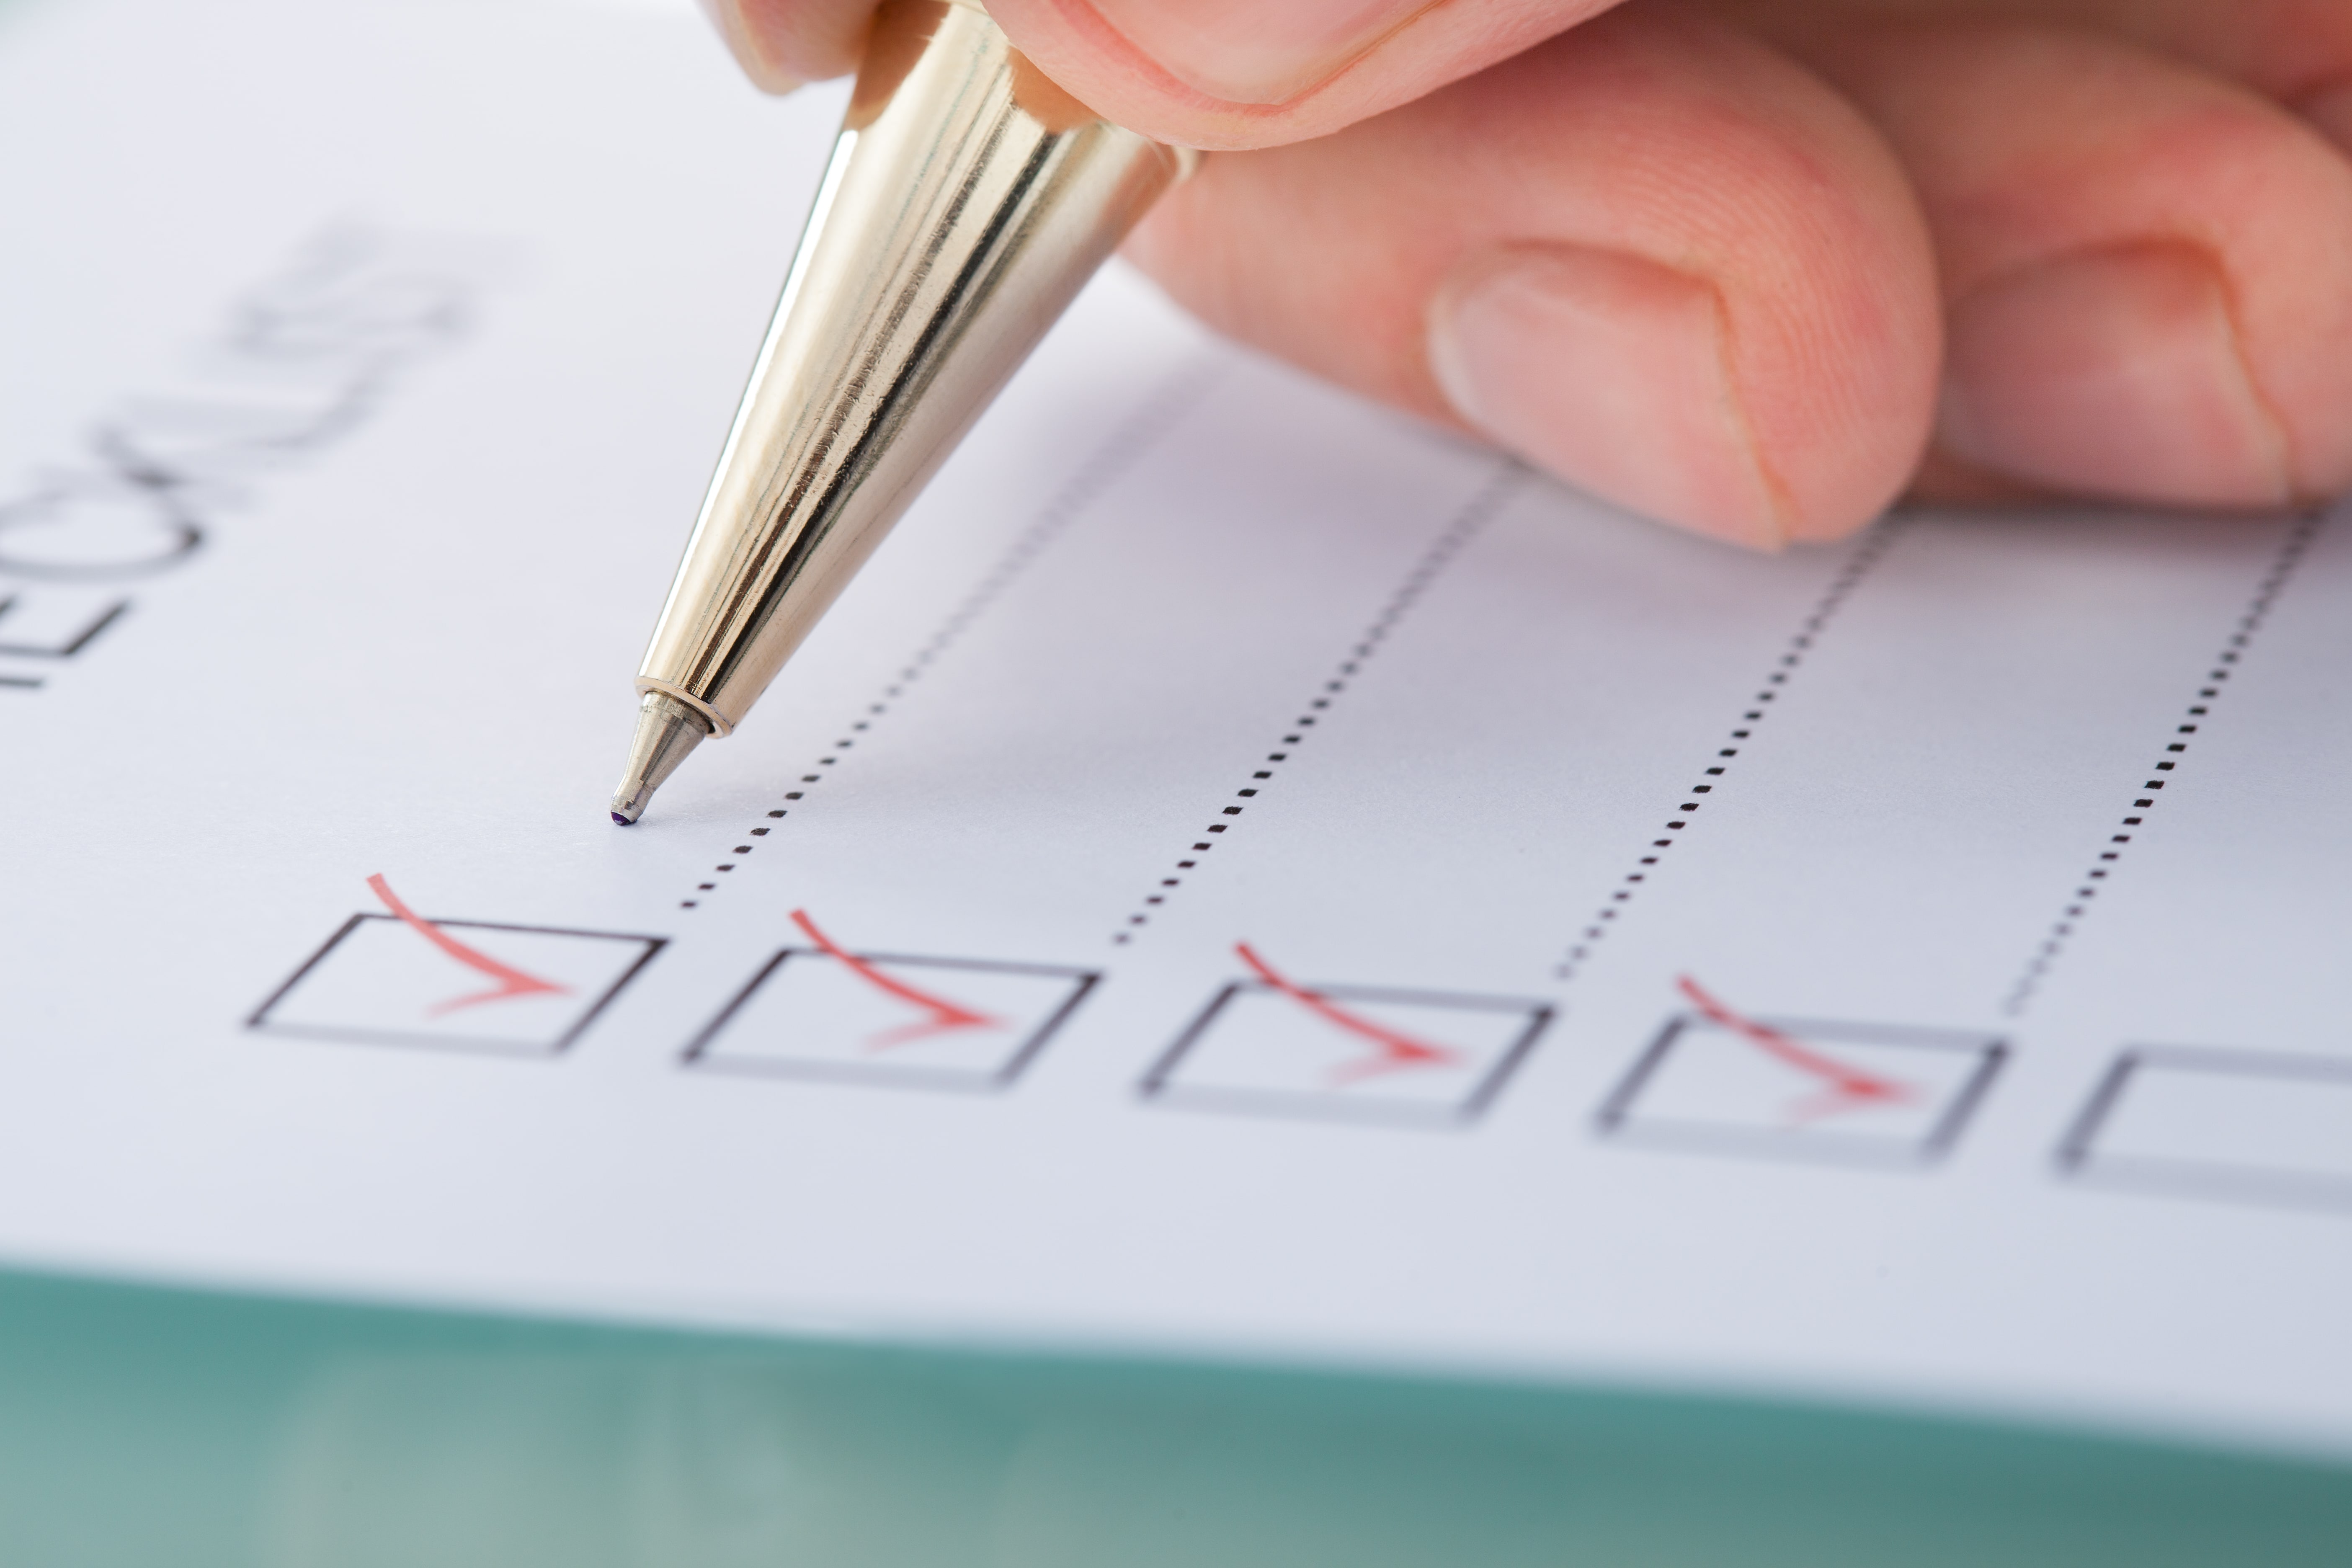 A Quick Tenant Screening Checklist For Landlords